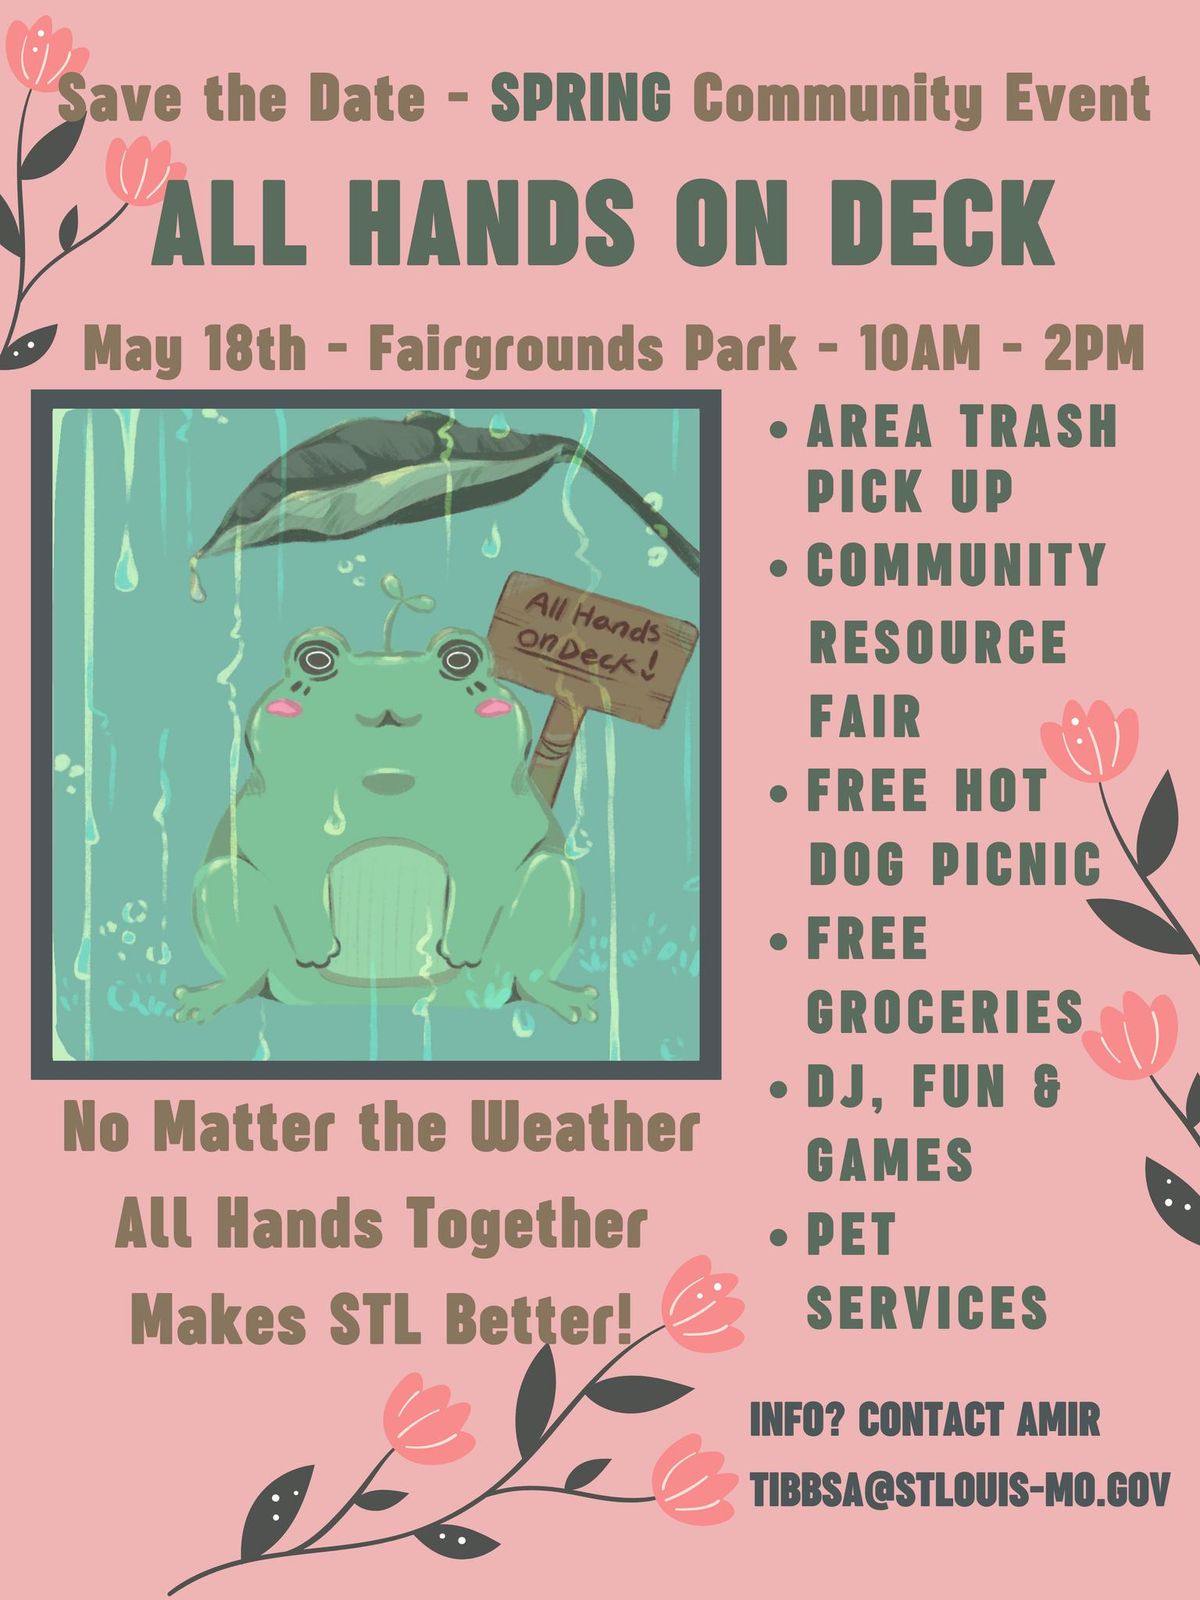 All Hands on Deck Spring Community Event